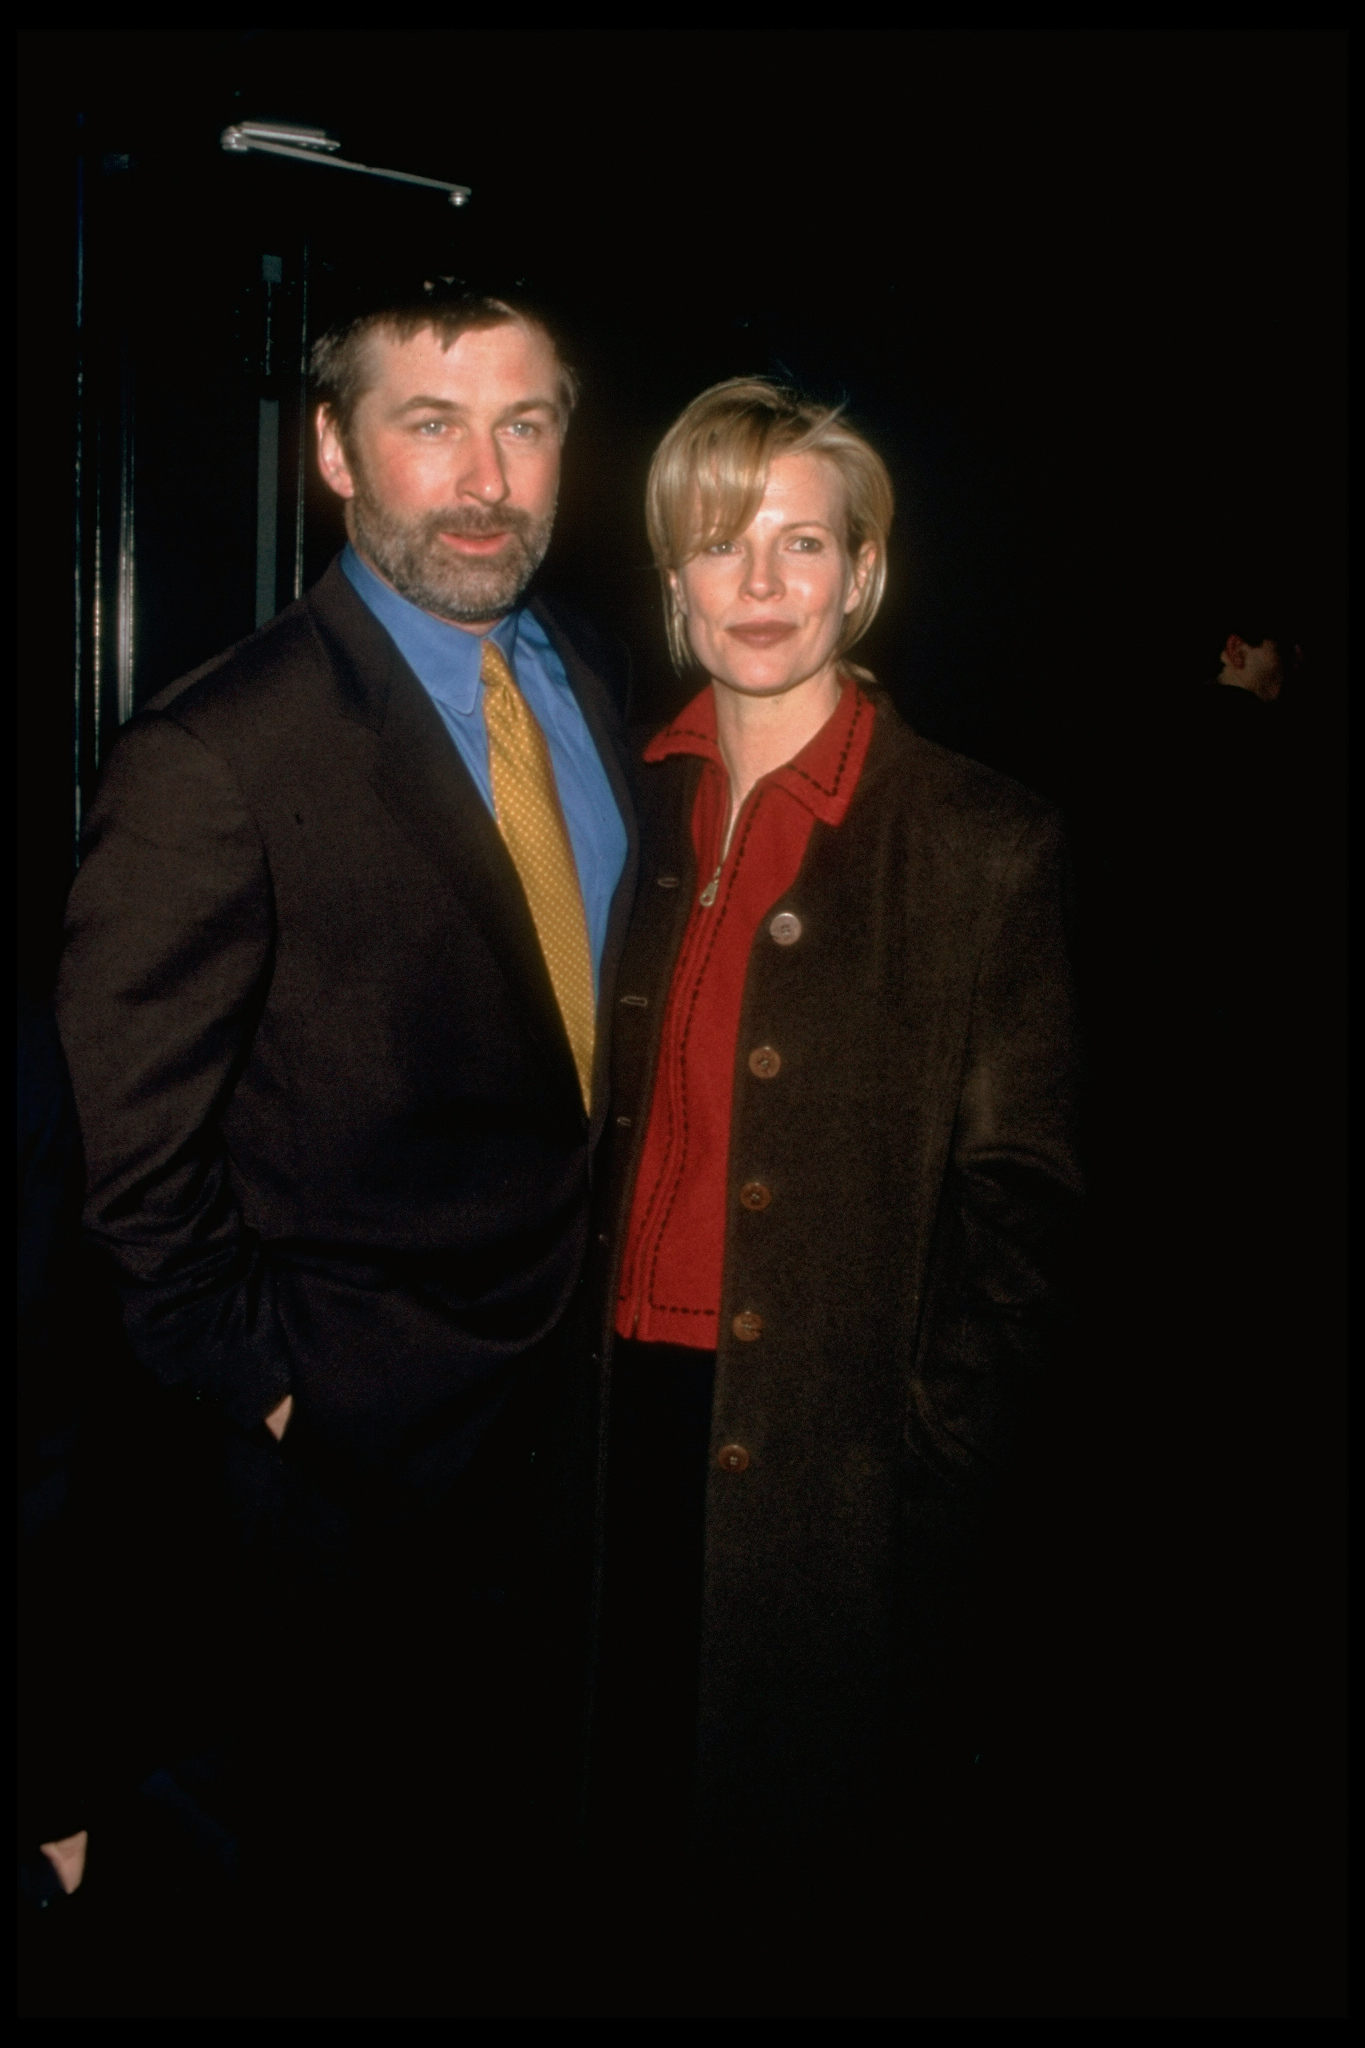 Kim Basinger during party after the opening of Macbeth on 1998-03-13